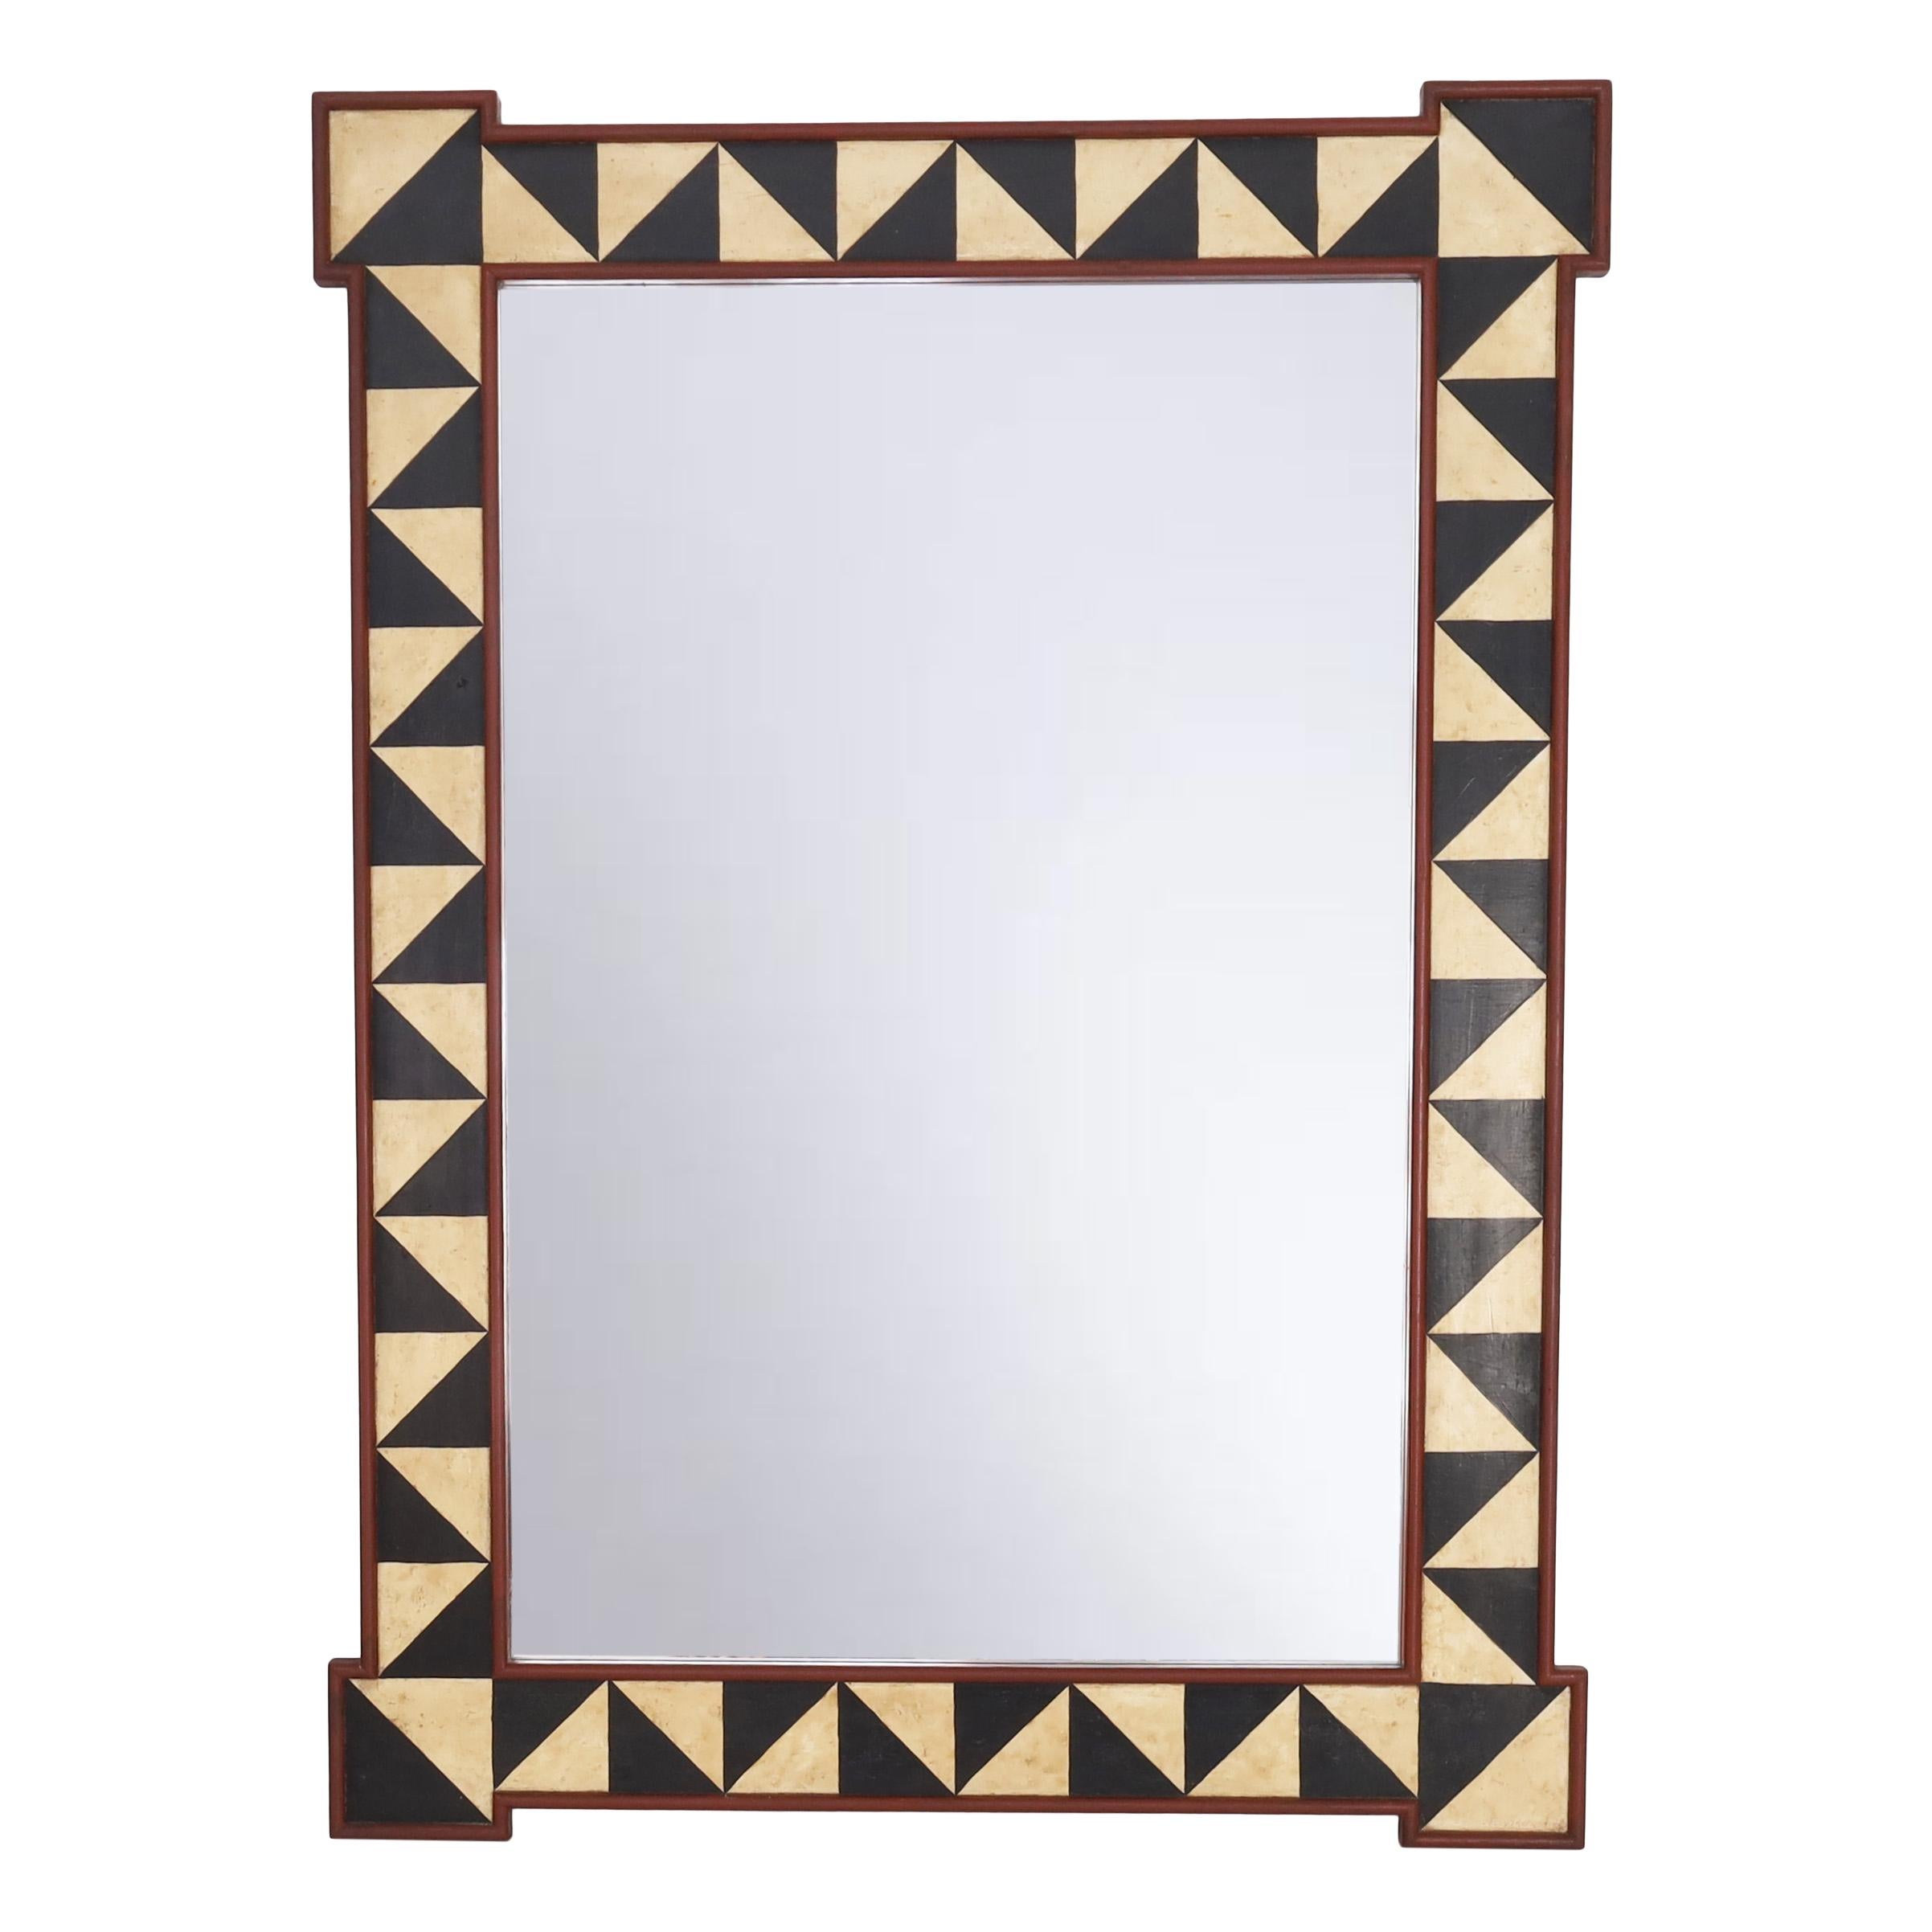 Intriguing pair of one of a kind large wall mirrors with classic form and plenty of decorative appeal, hand decorated in muted warm colors in geometric designs. Signed Jolly Irving 2006 in the lower right. 